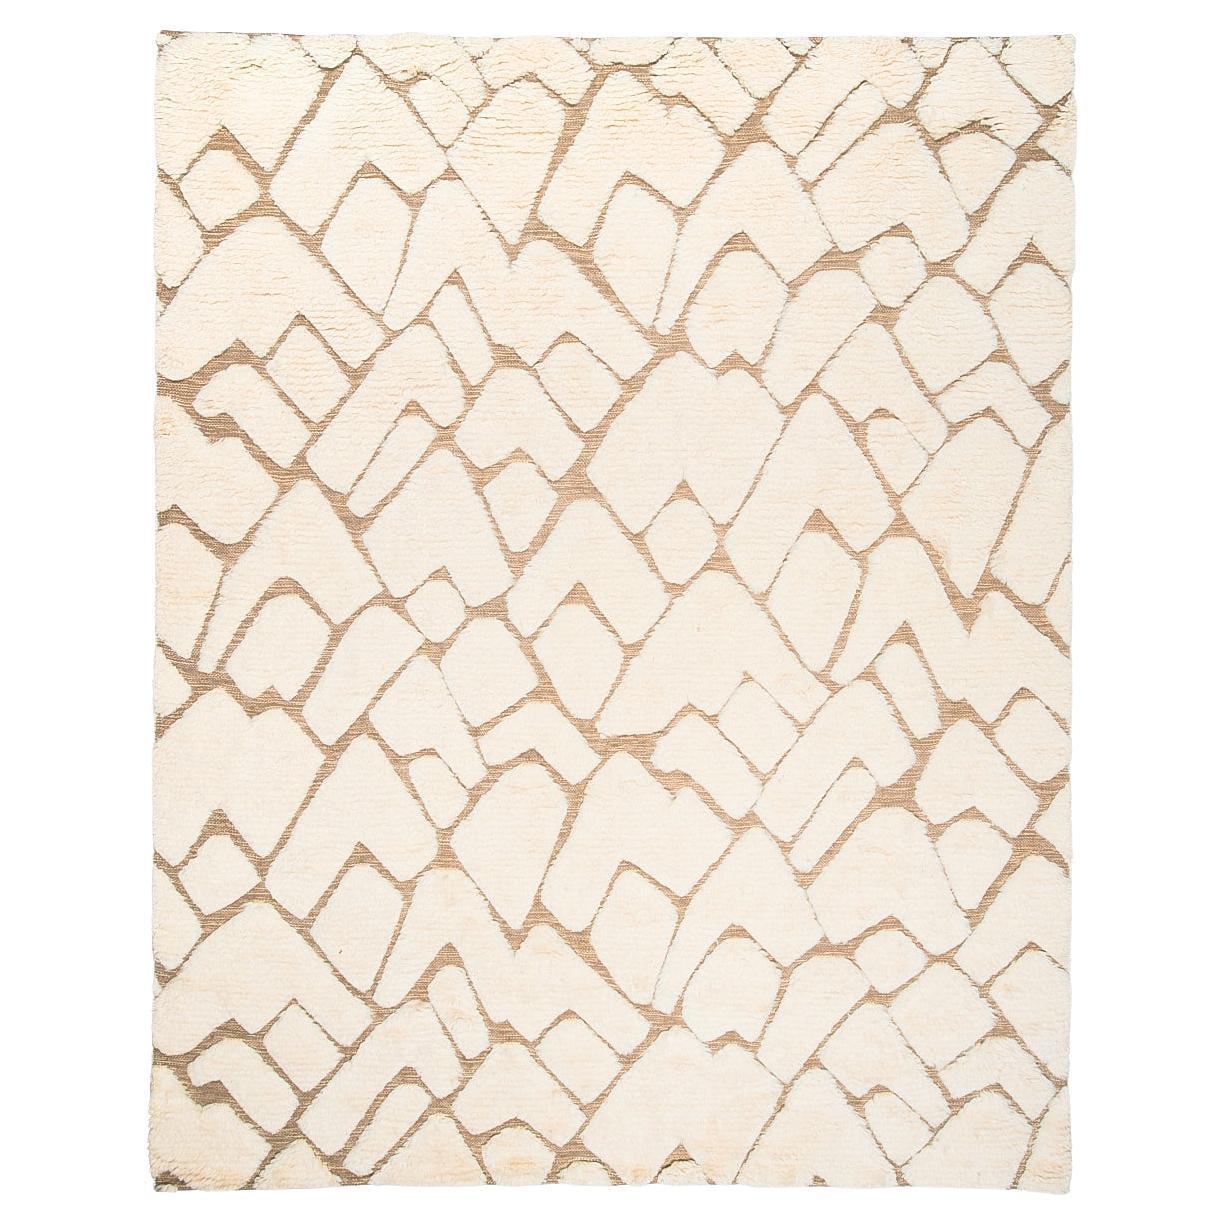 Schumacher Zimba 8' x 10' Rug In Ivory & Sand For Sale